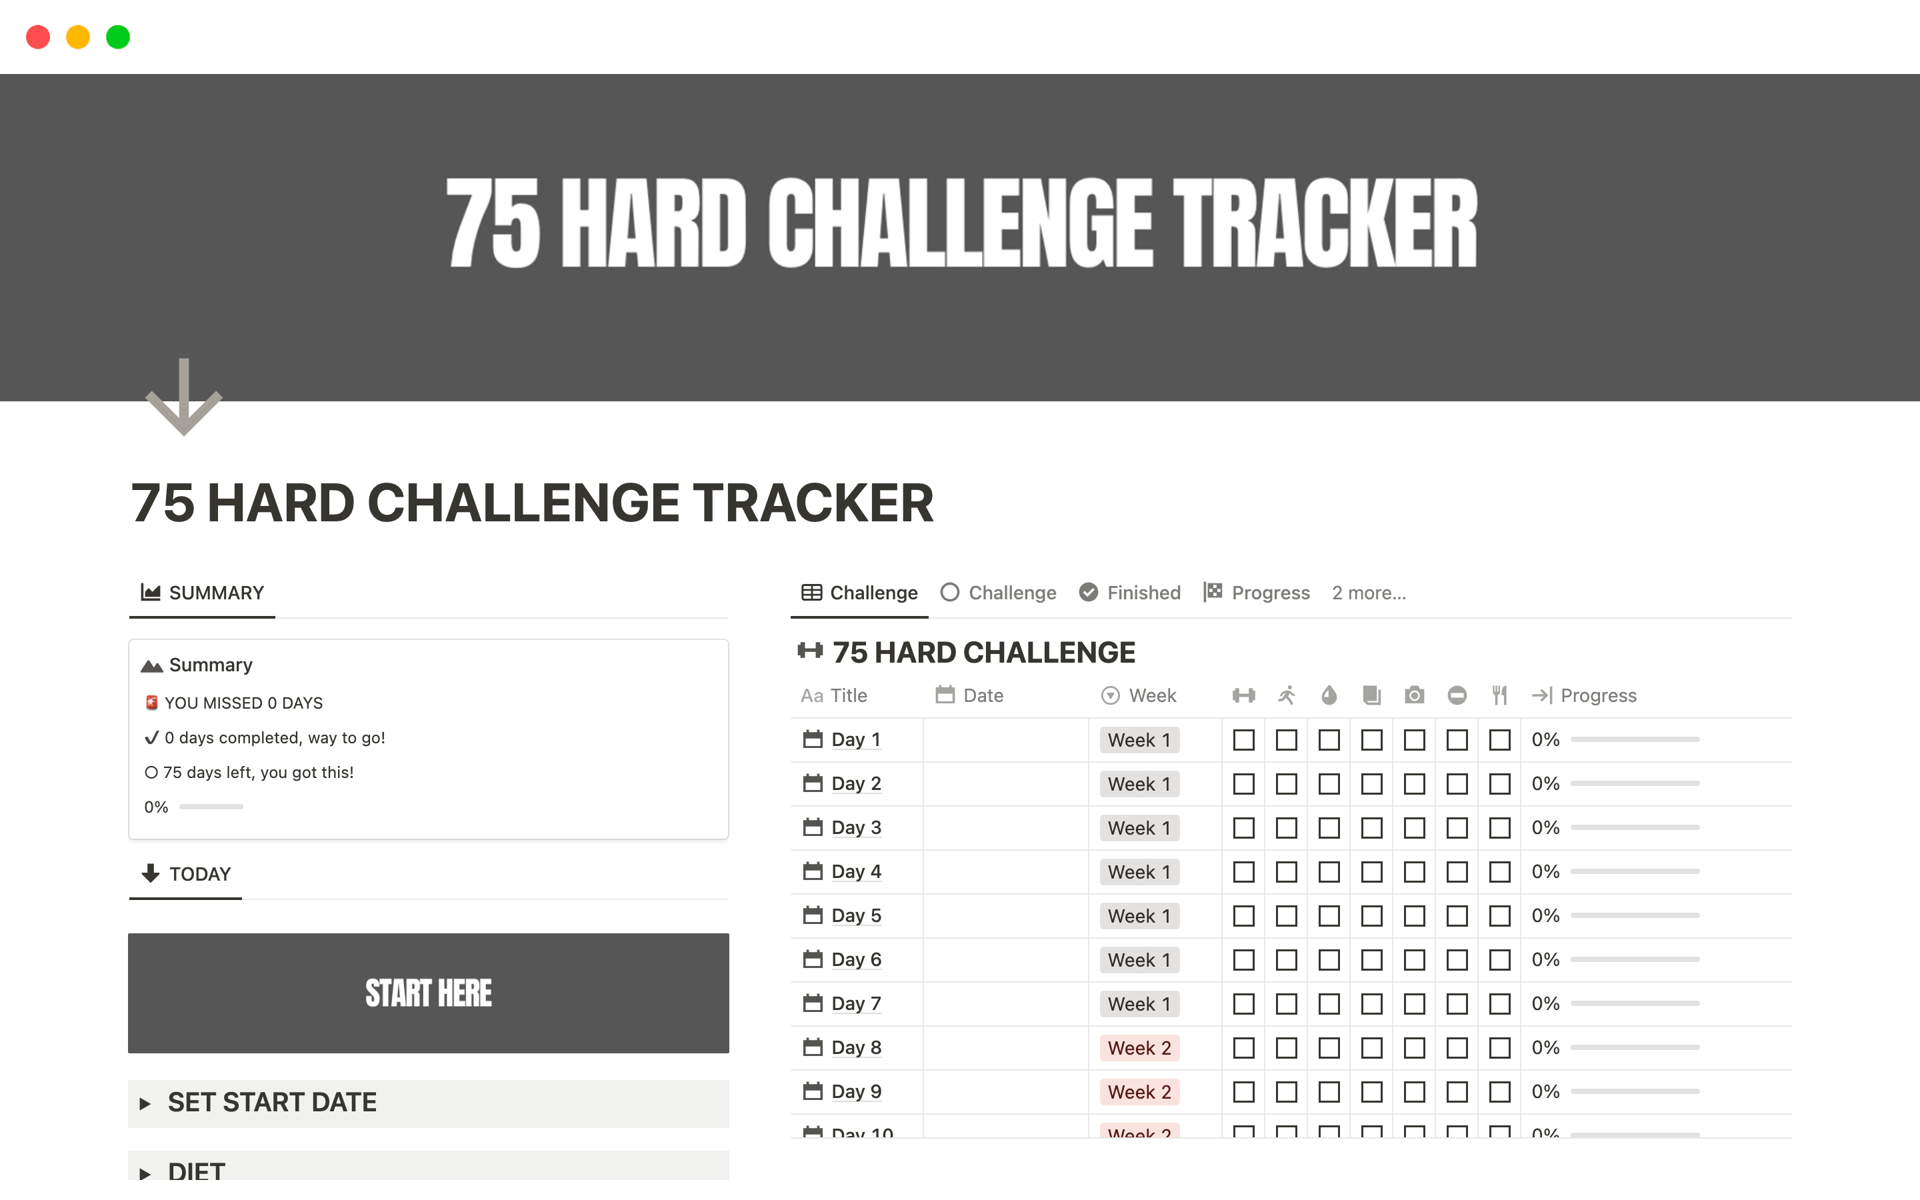 Track your daily progress and stay motivated during your 75 Hard Challenge